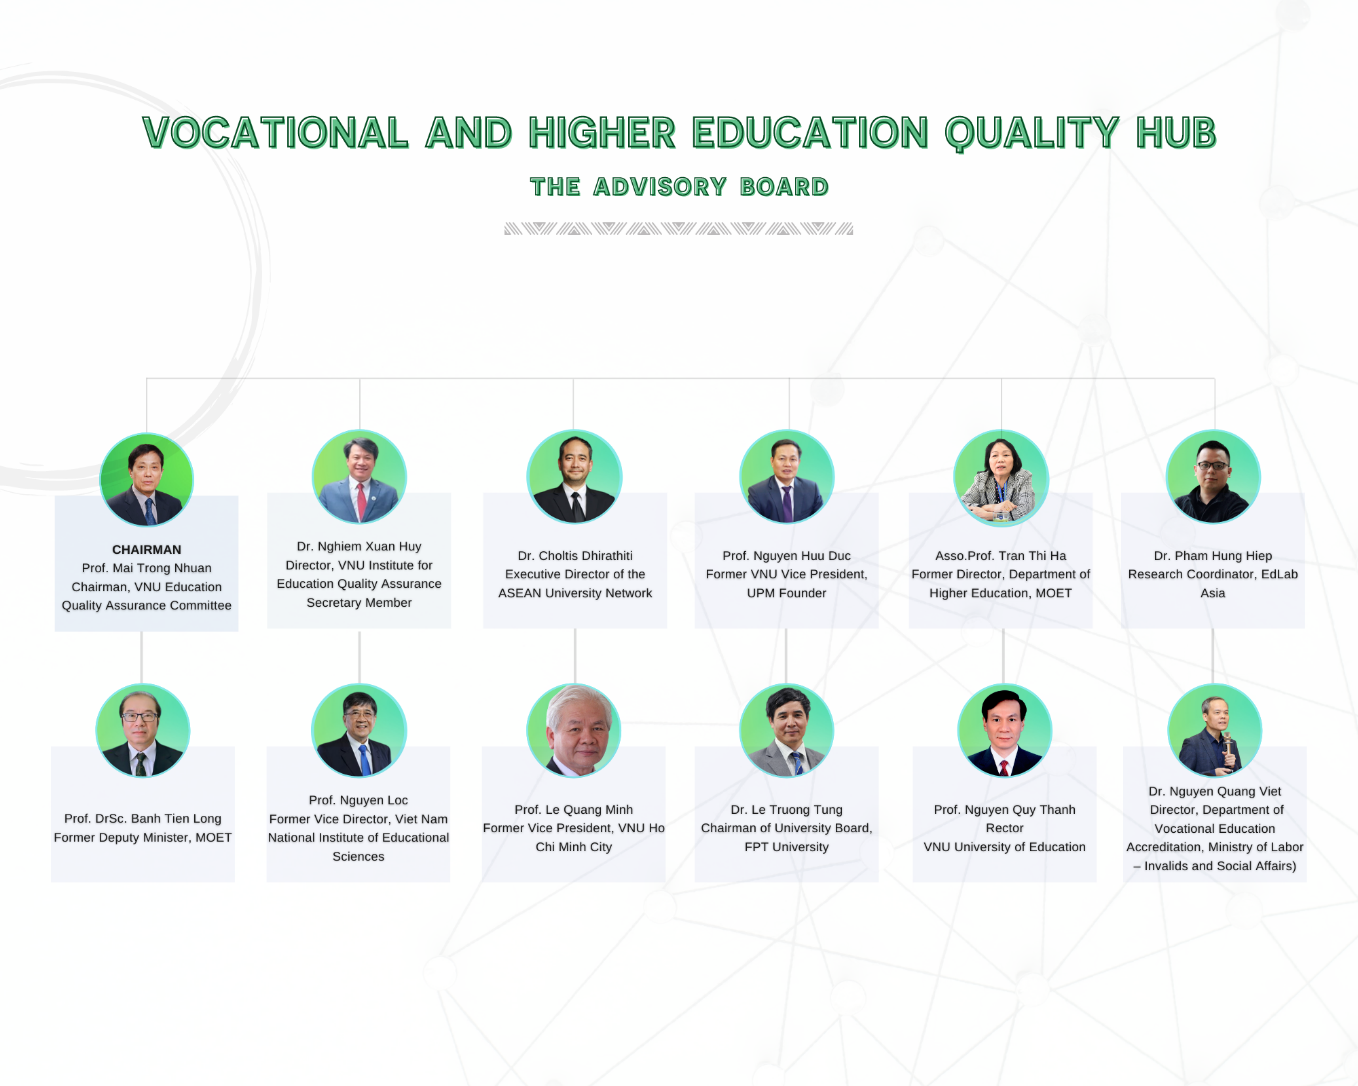 Advisory Board of The Vocational and Higher Education Quality Hub